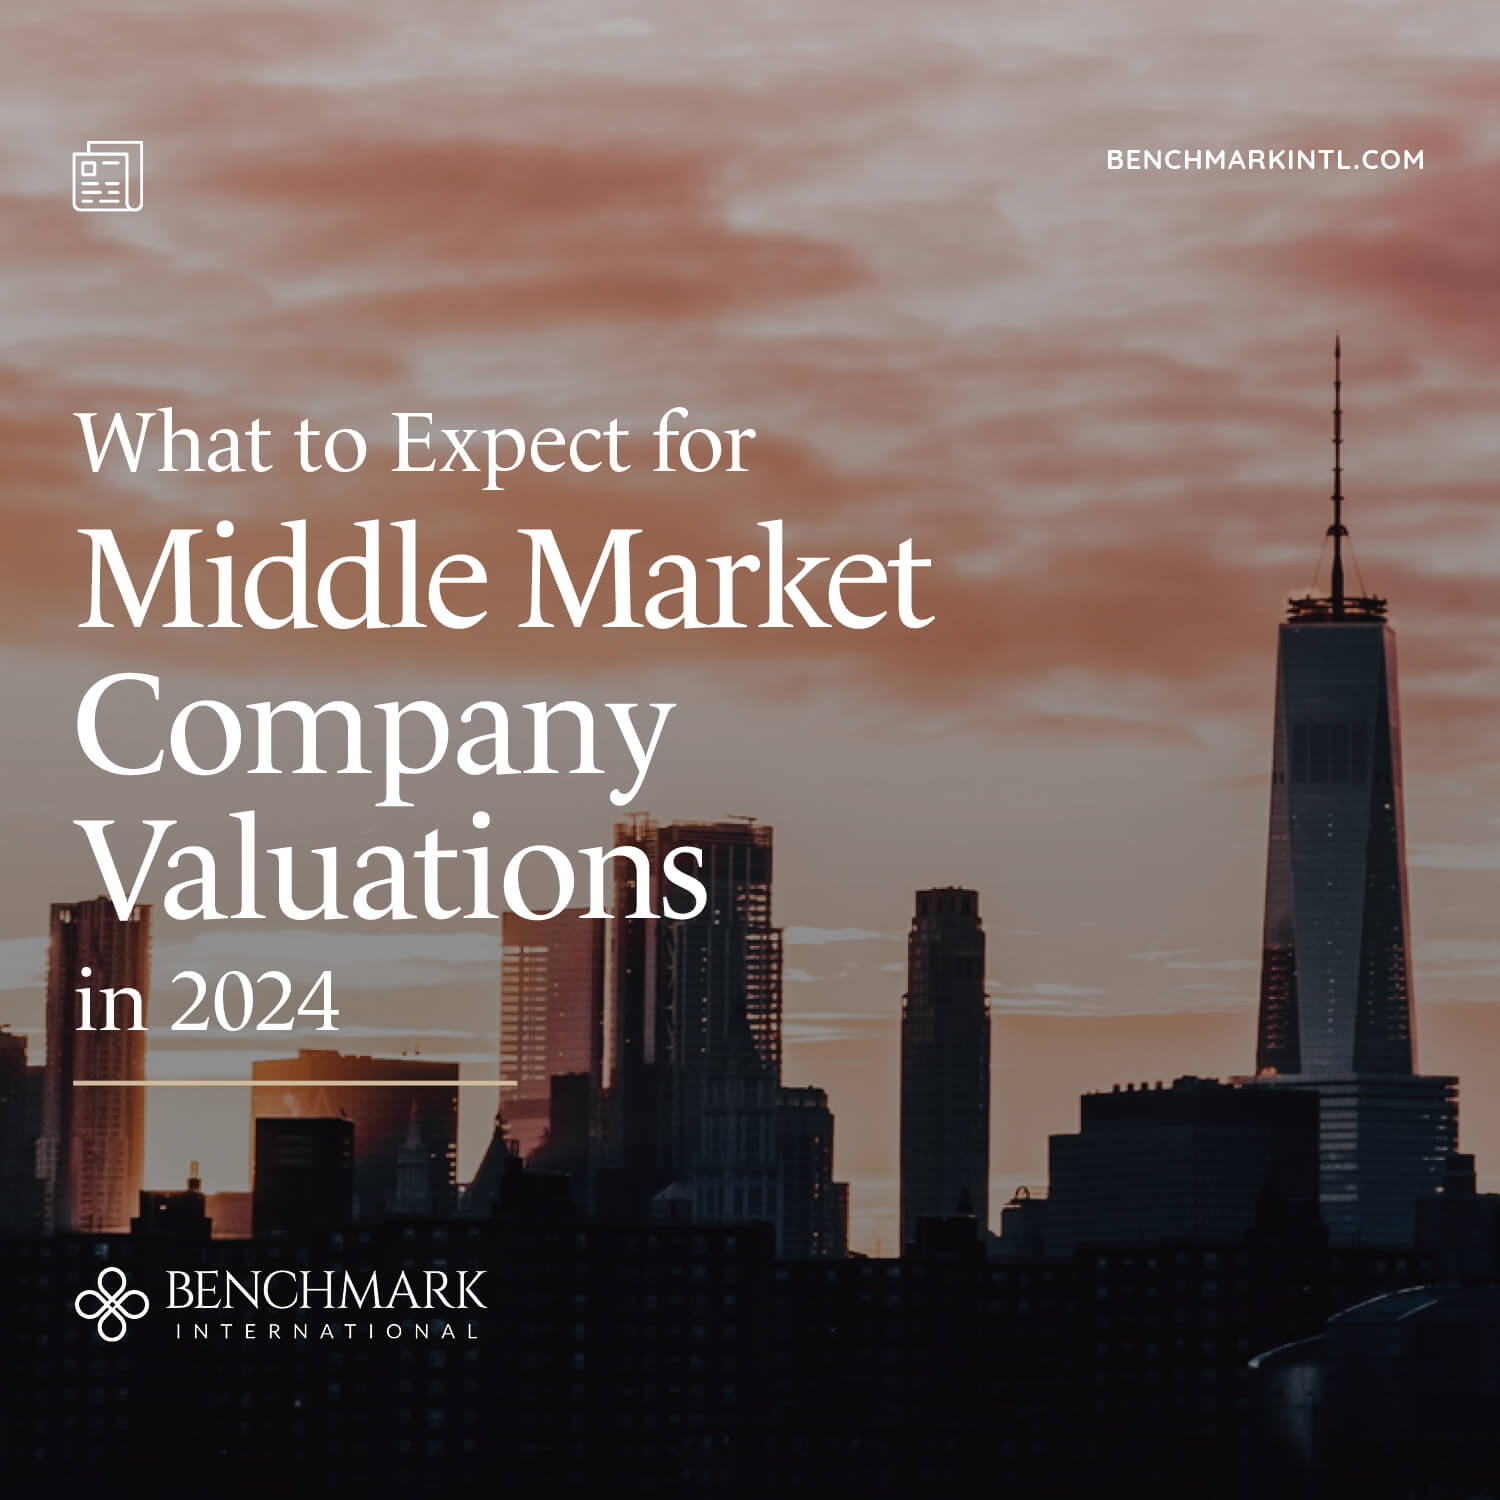 MRKTG_Social_New_Strategy_2023_Blog_Mobile-Middle-Market-Company-Valuations-2024